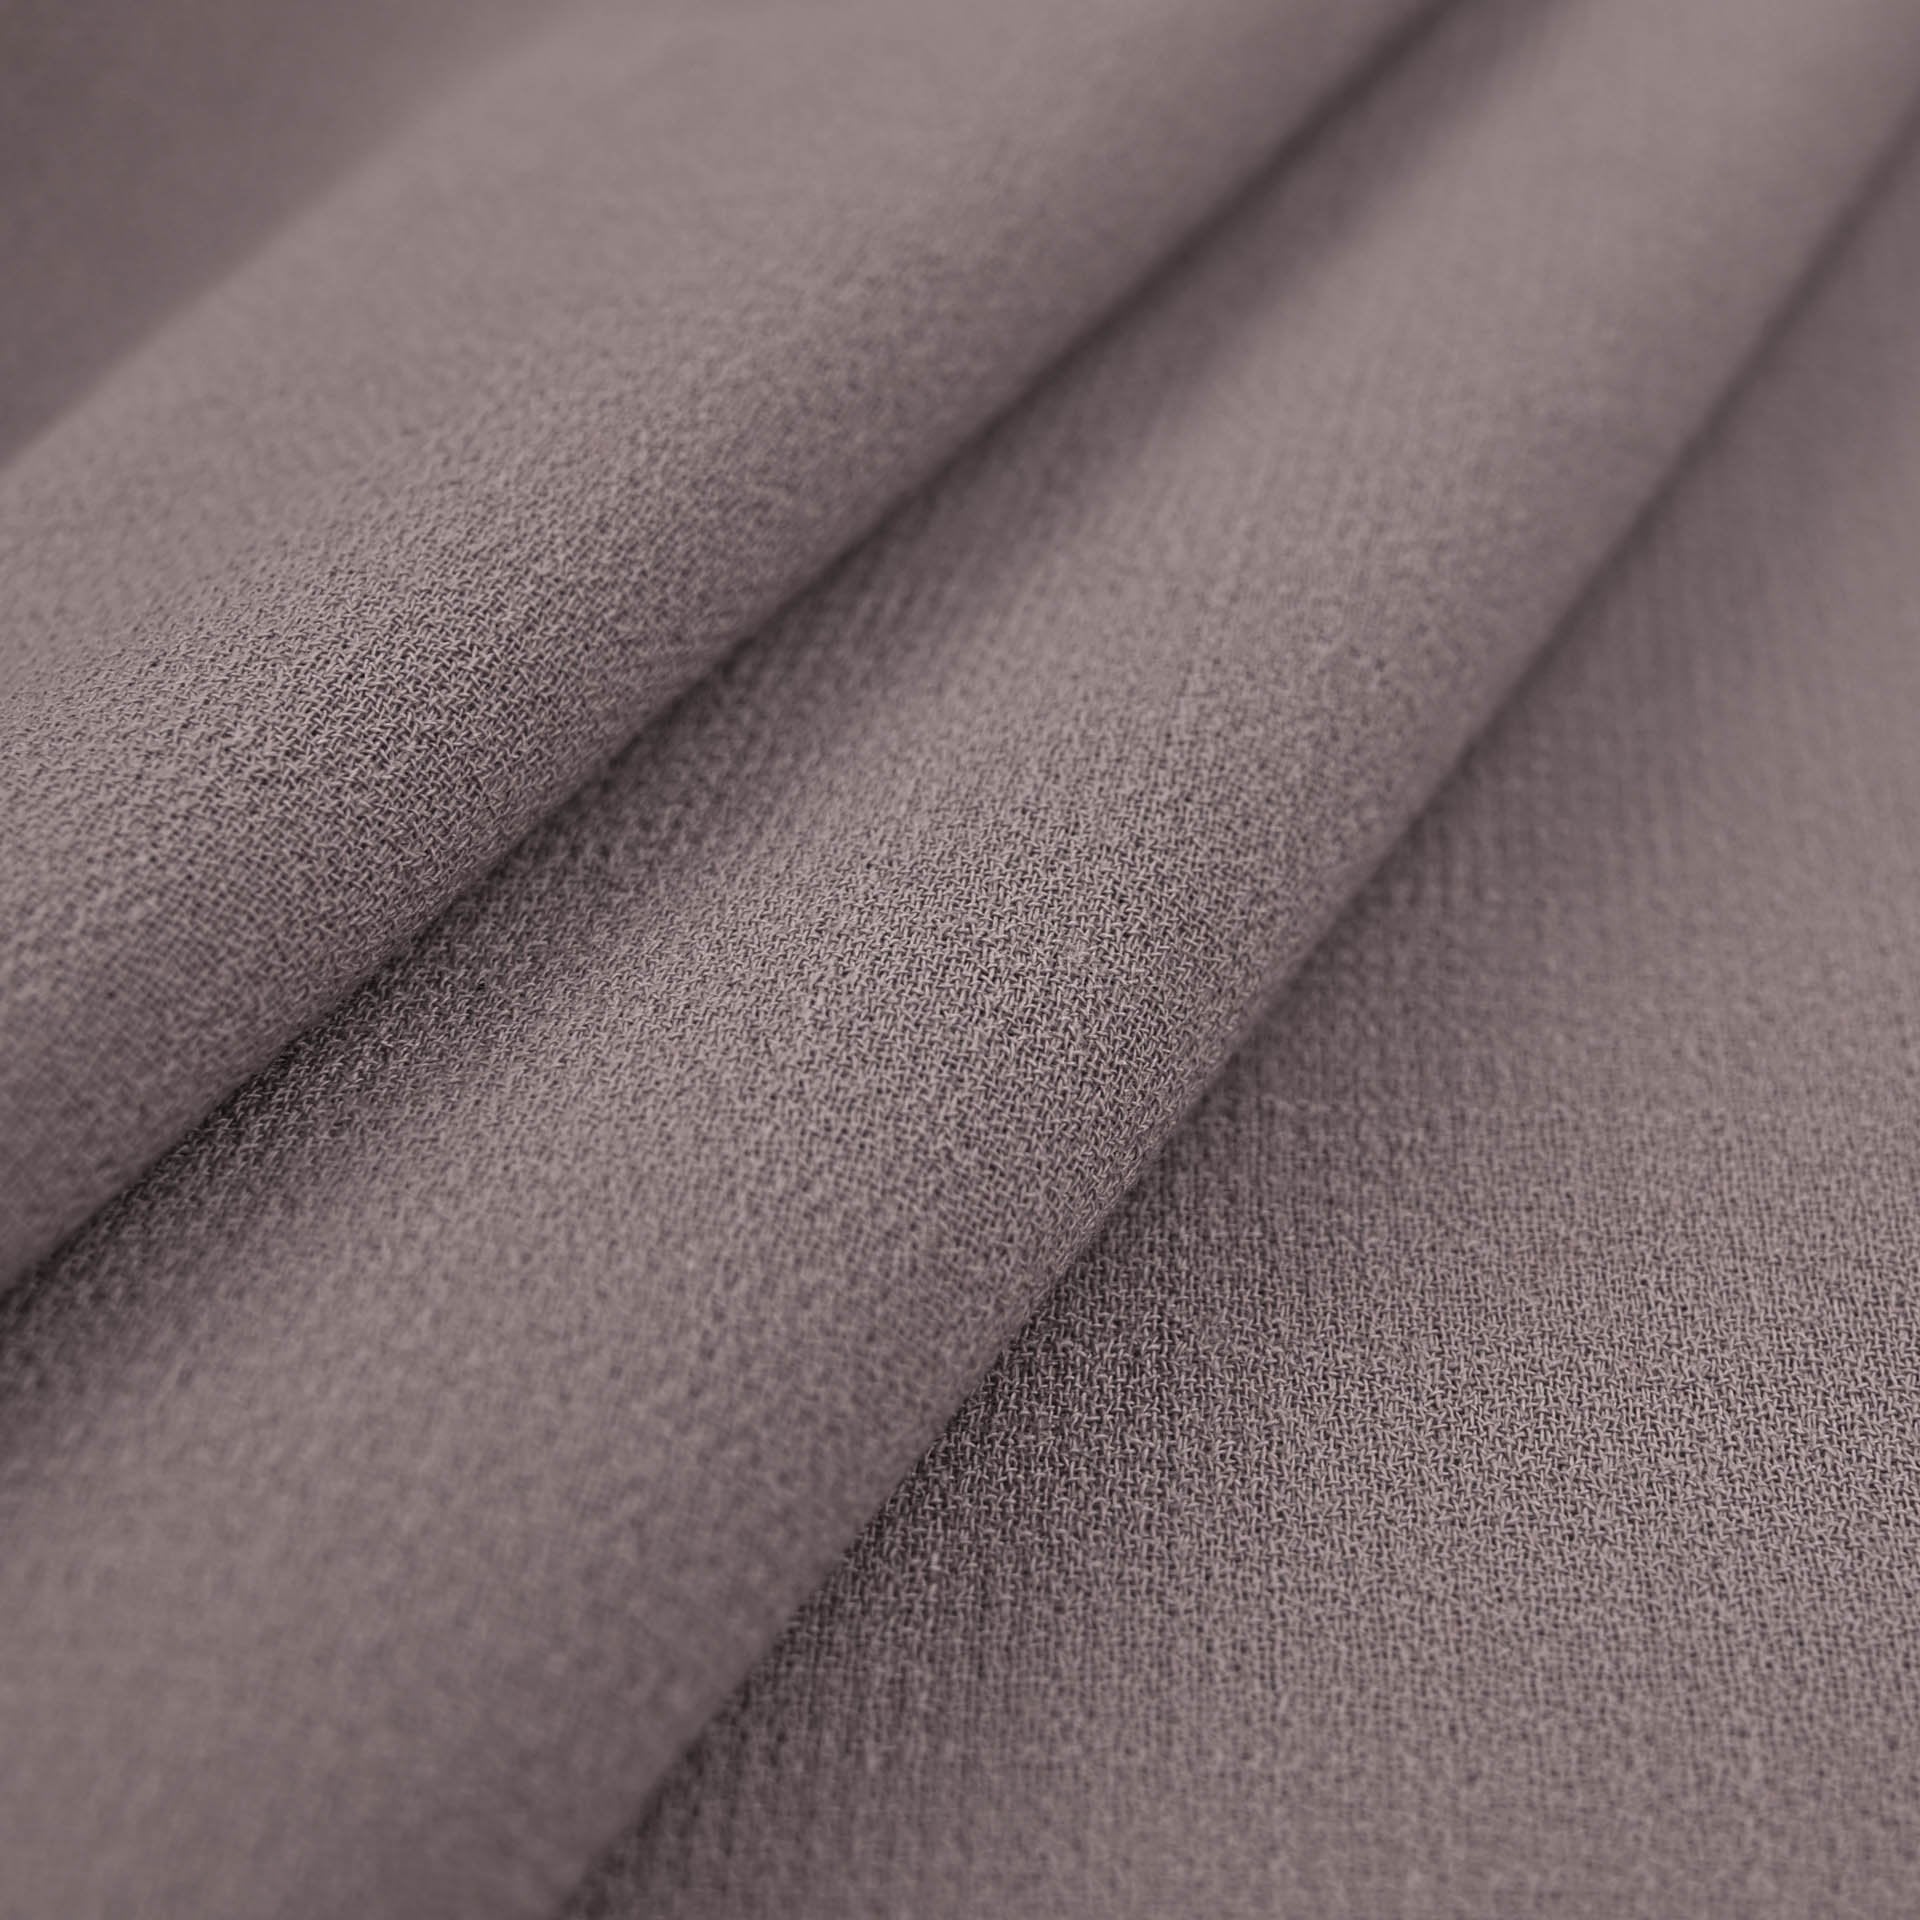 Double-Weave Crepe Fabric 96867